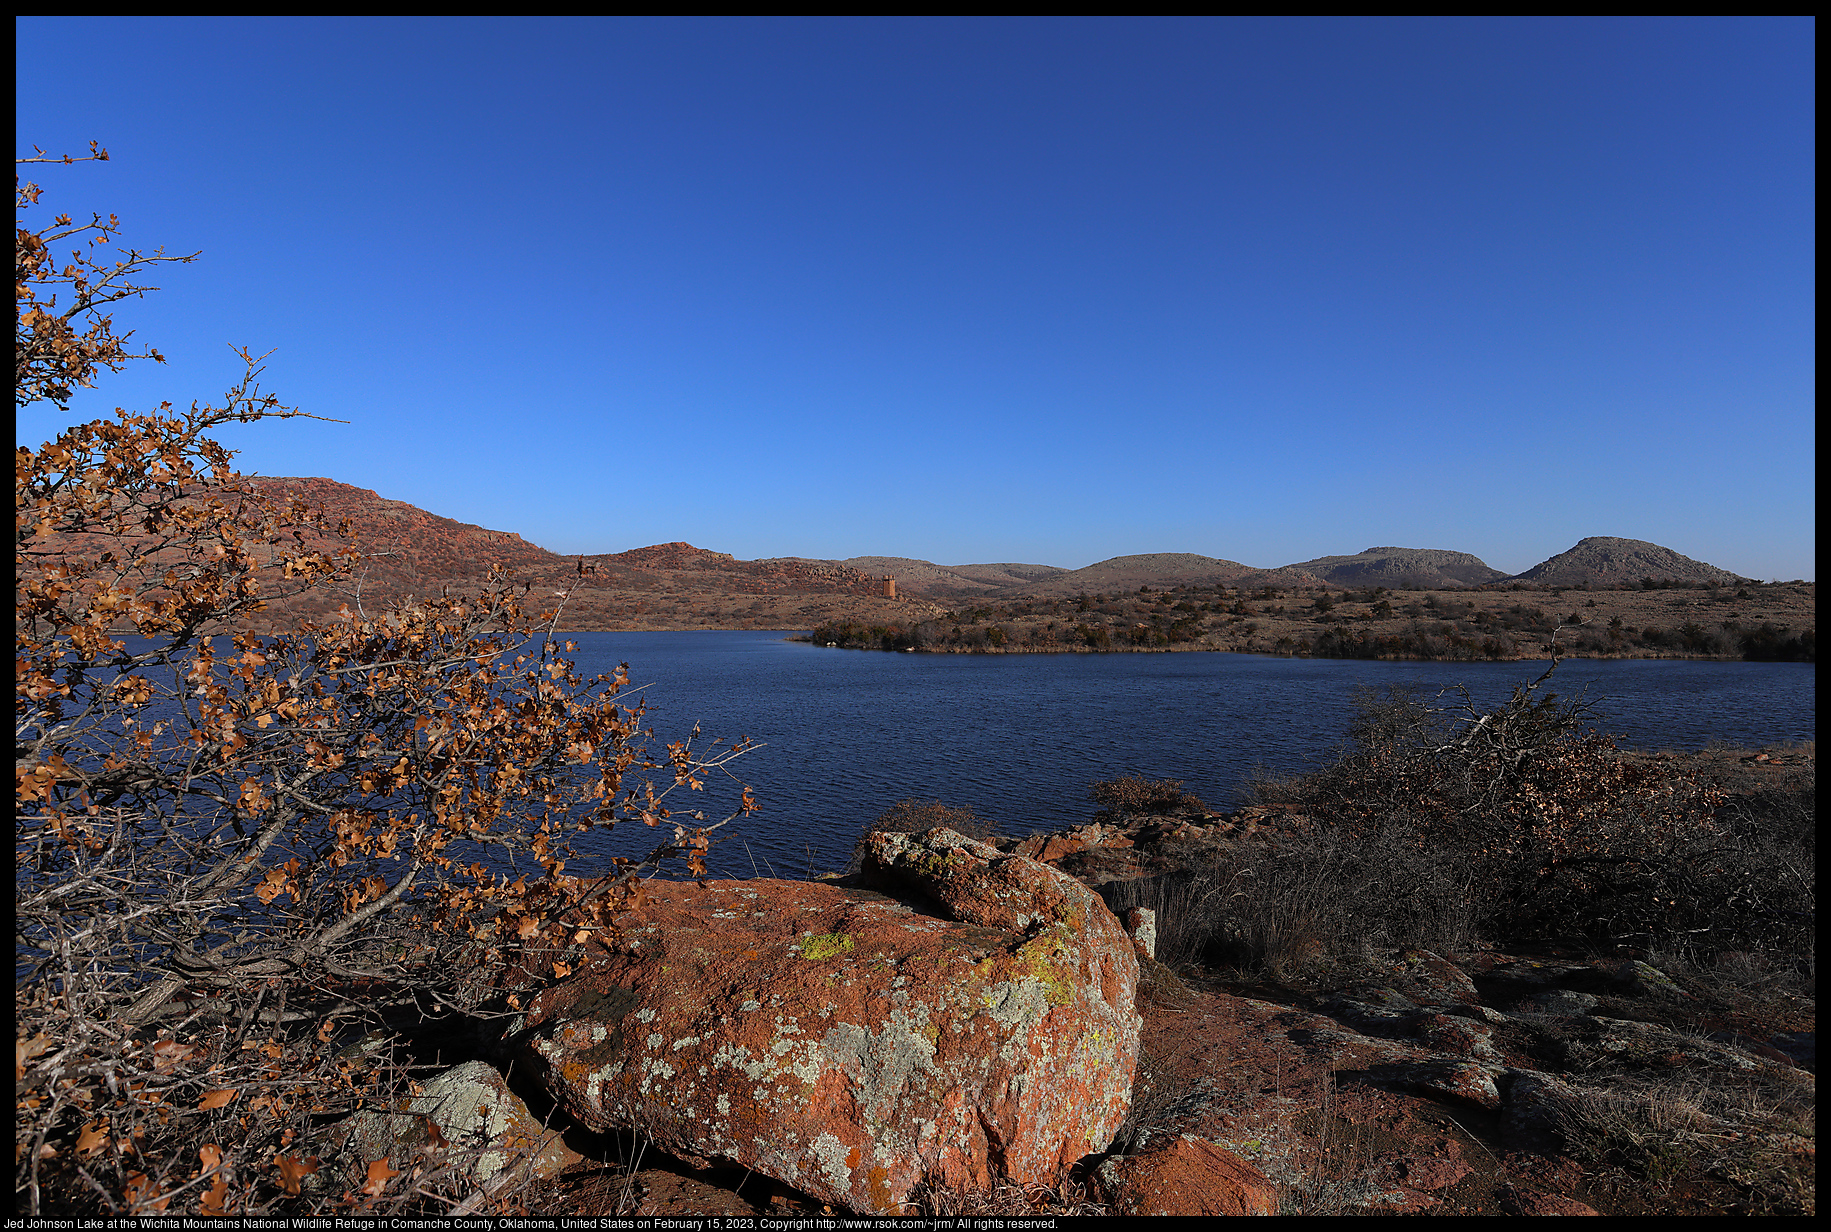 Jed Johnson Lake at the Wichita Mountains National Wildlife Refuge in Comanche County, Oklahoma, United States on February 15, 2023